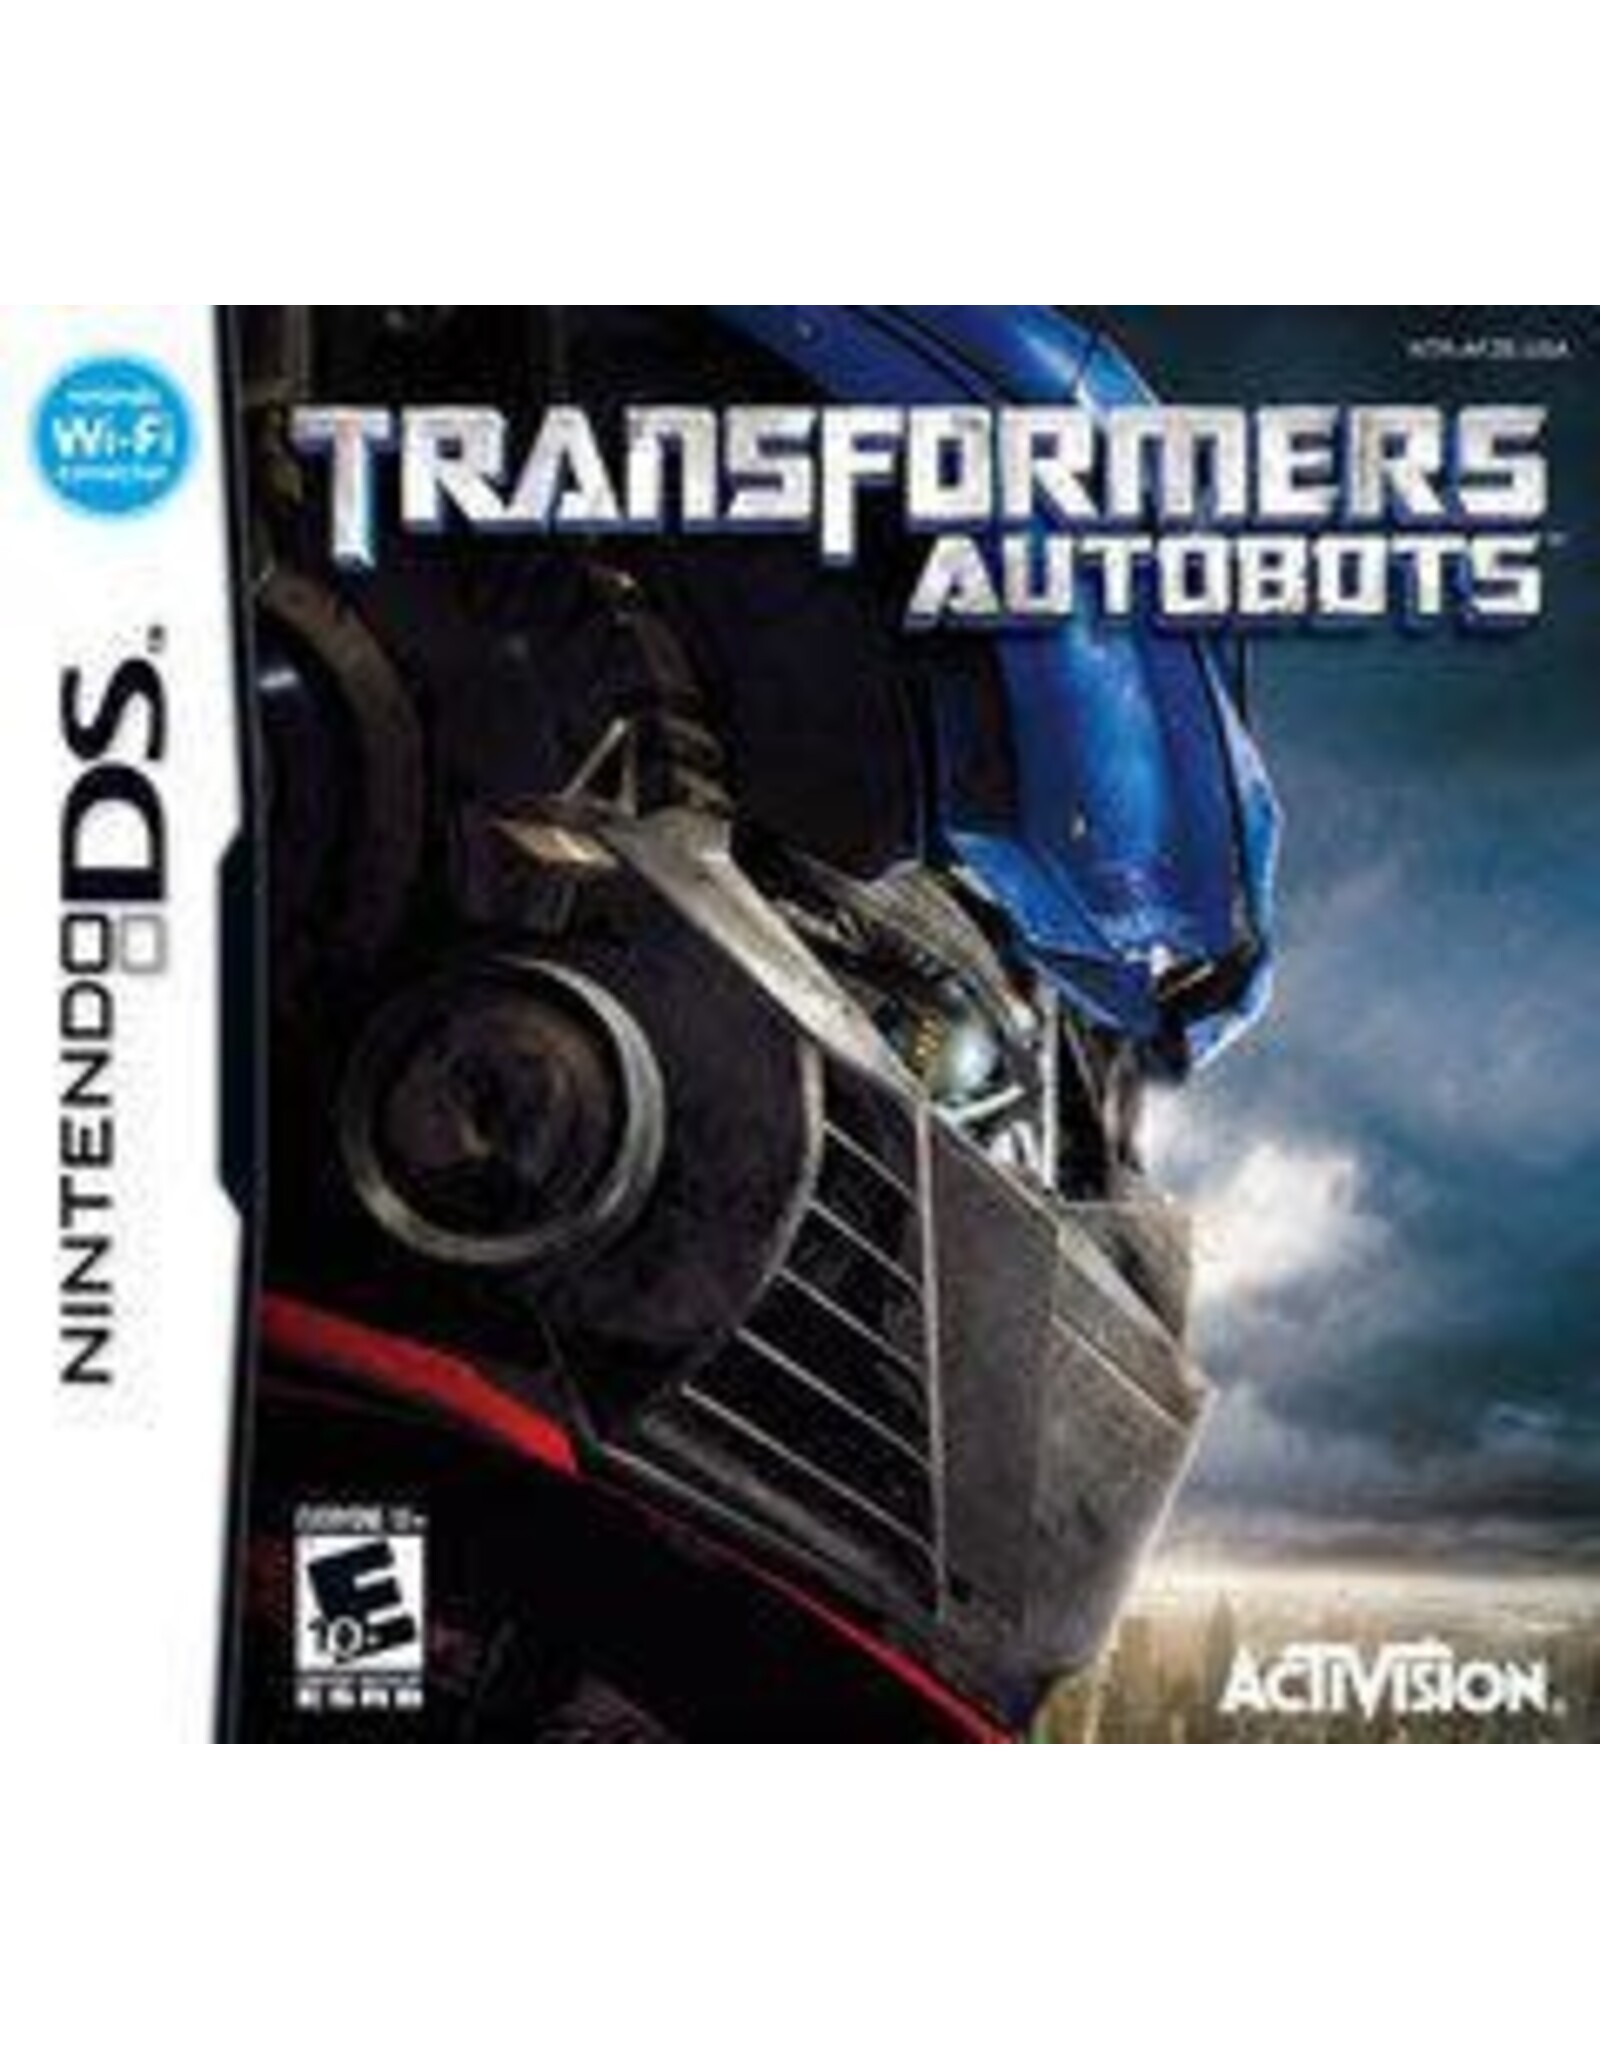 Nintendo DS Transformers Autobots (Cart Only)